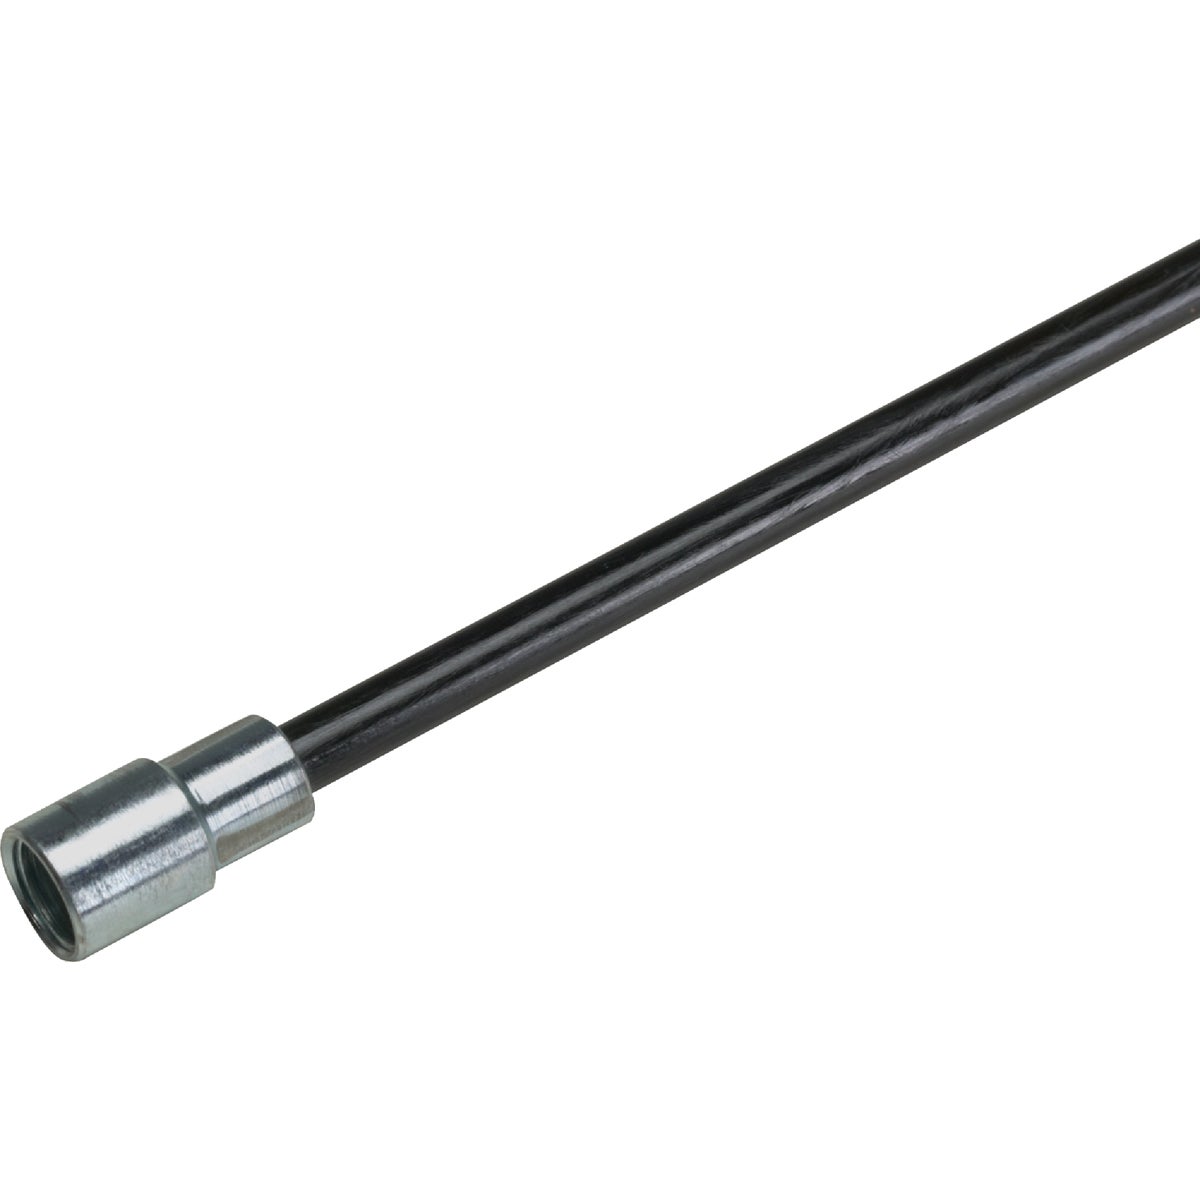 Item 425392, 4' flexible fiberglass extension rod kit for use with all 1/4" NPT chimney 